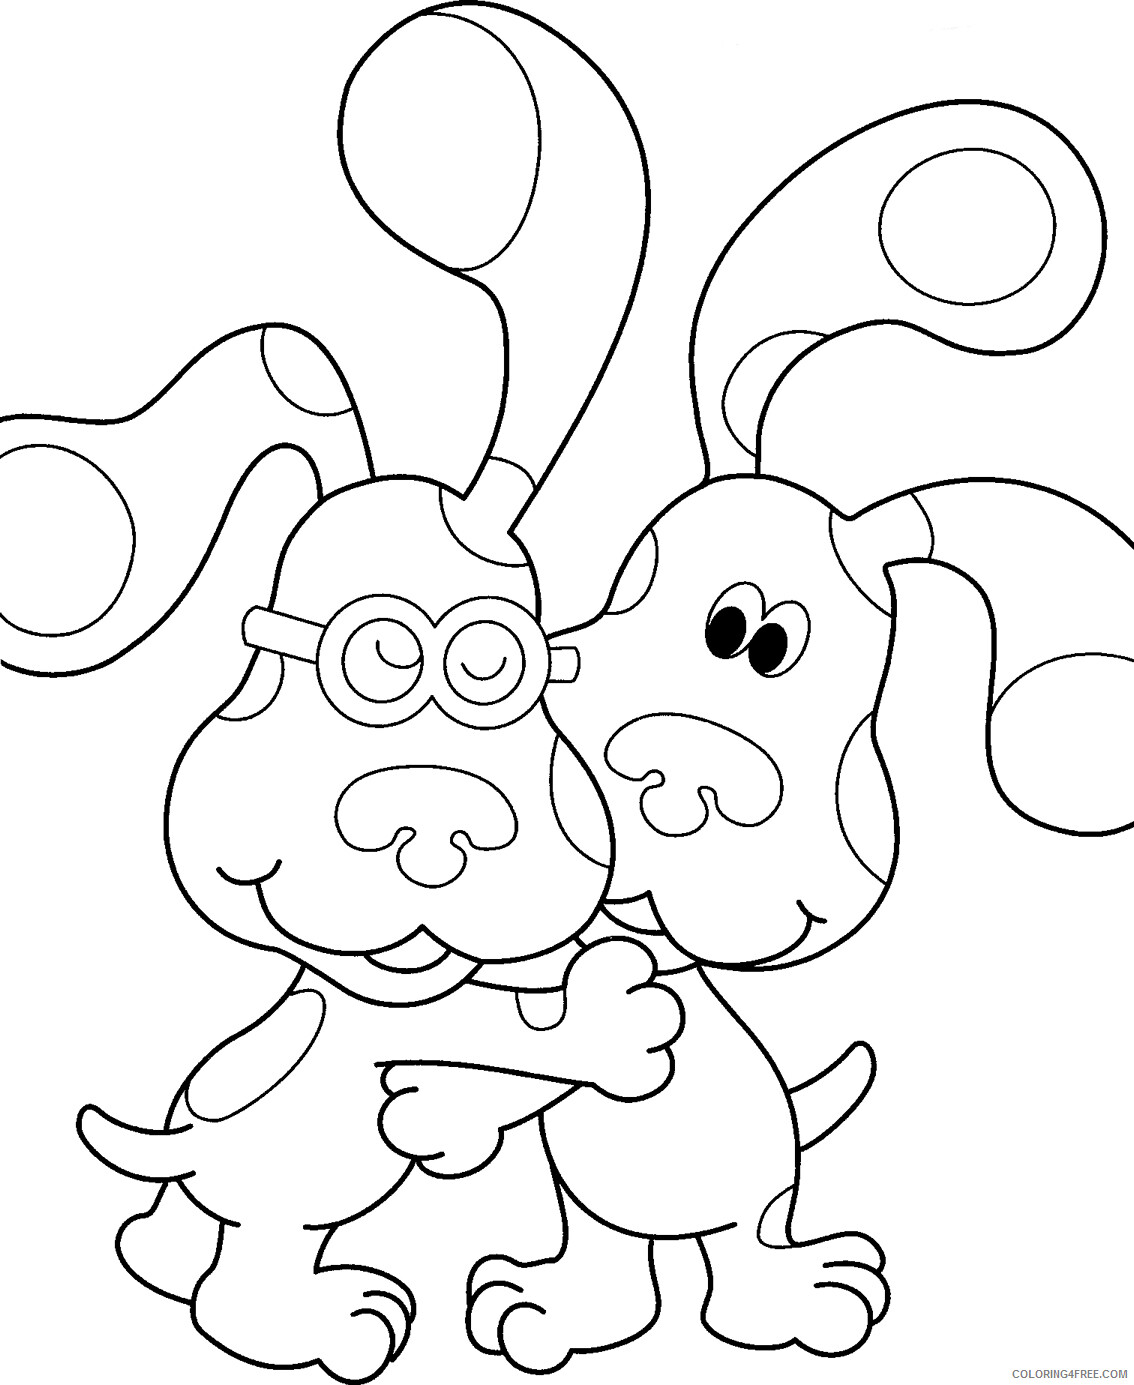 Blues Clues Coloring Pages TV Film Blues Clues To Print Printable 2020 00903 Coloring4free